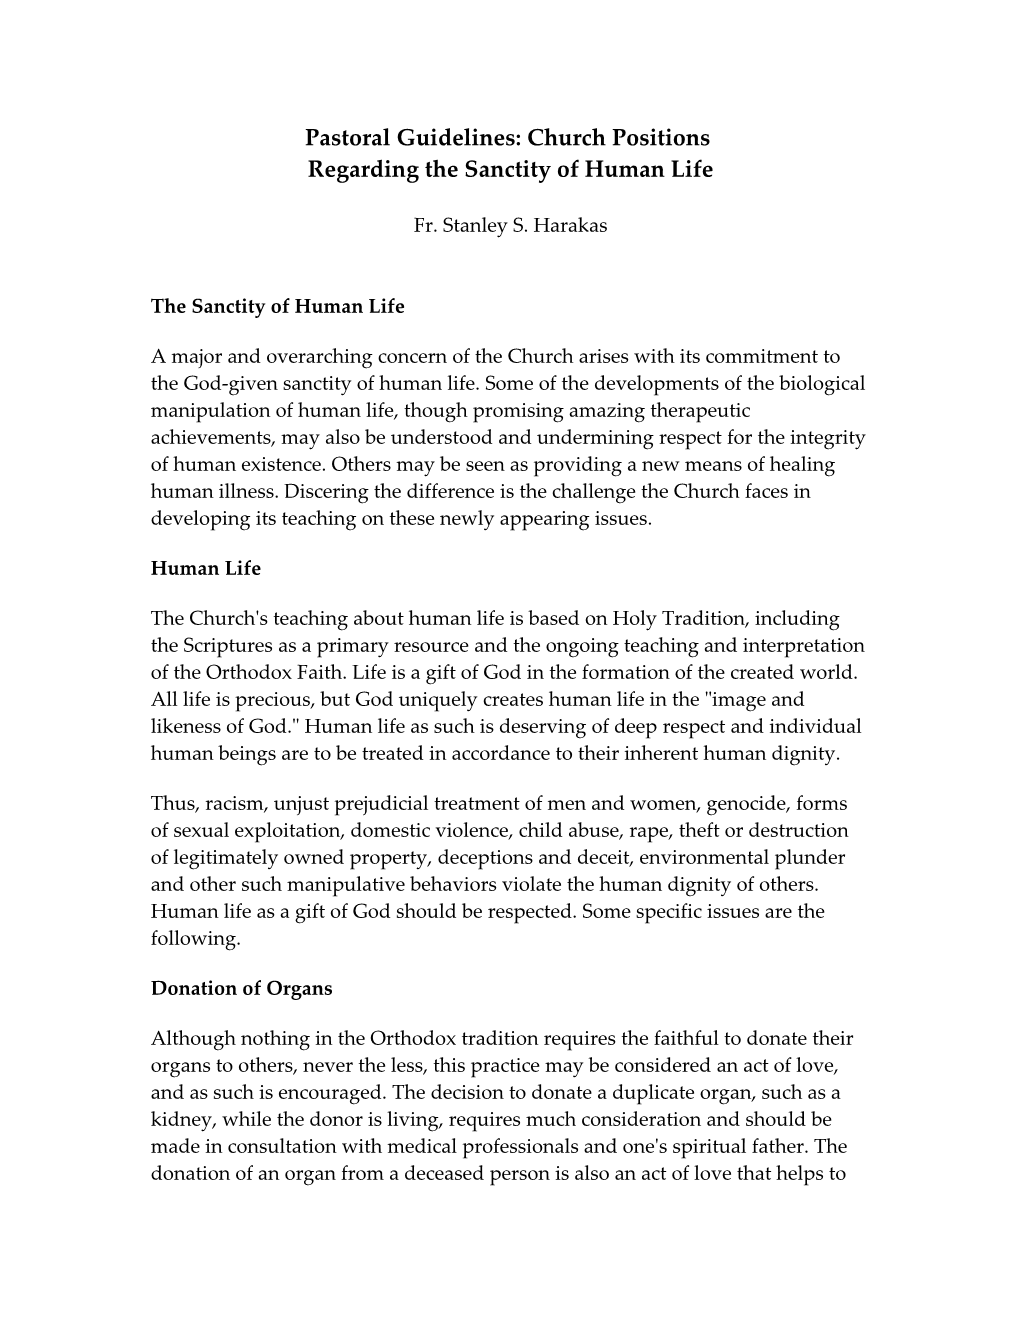 Pastoral Guidelines: Church Positions Regarding the Sanctity of Human Life